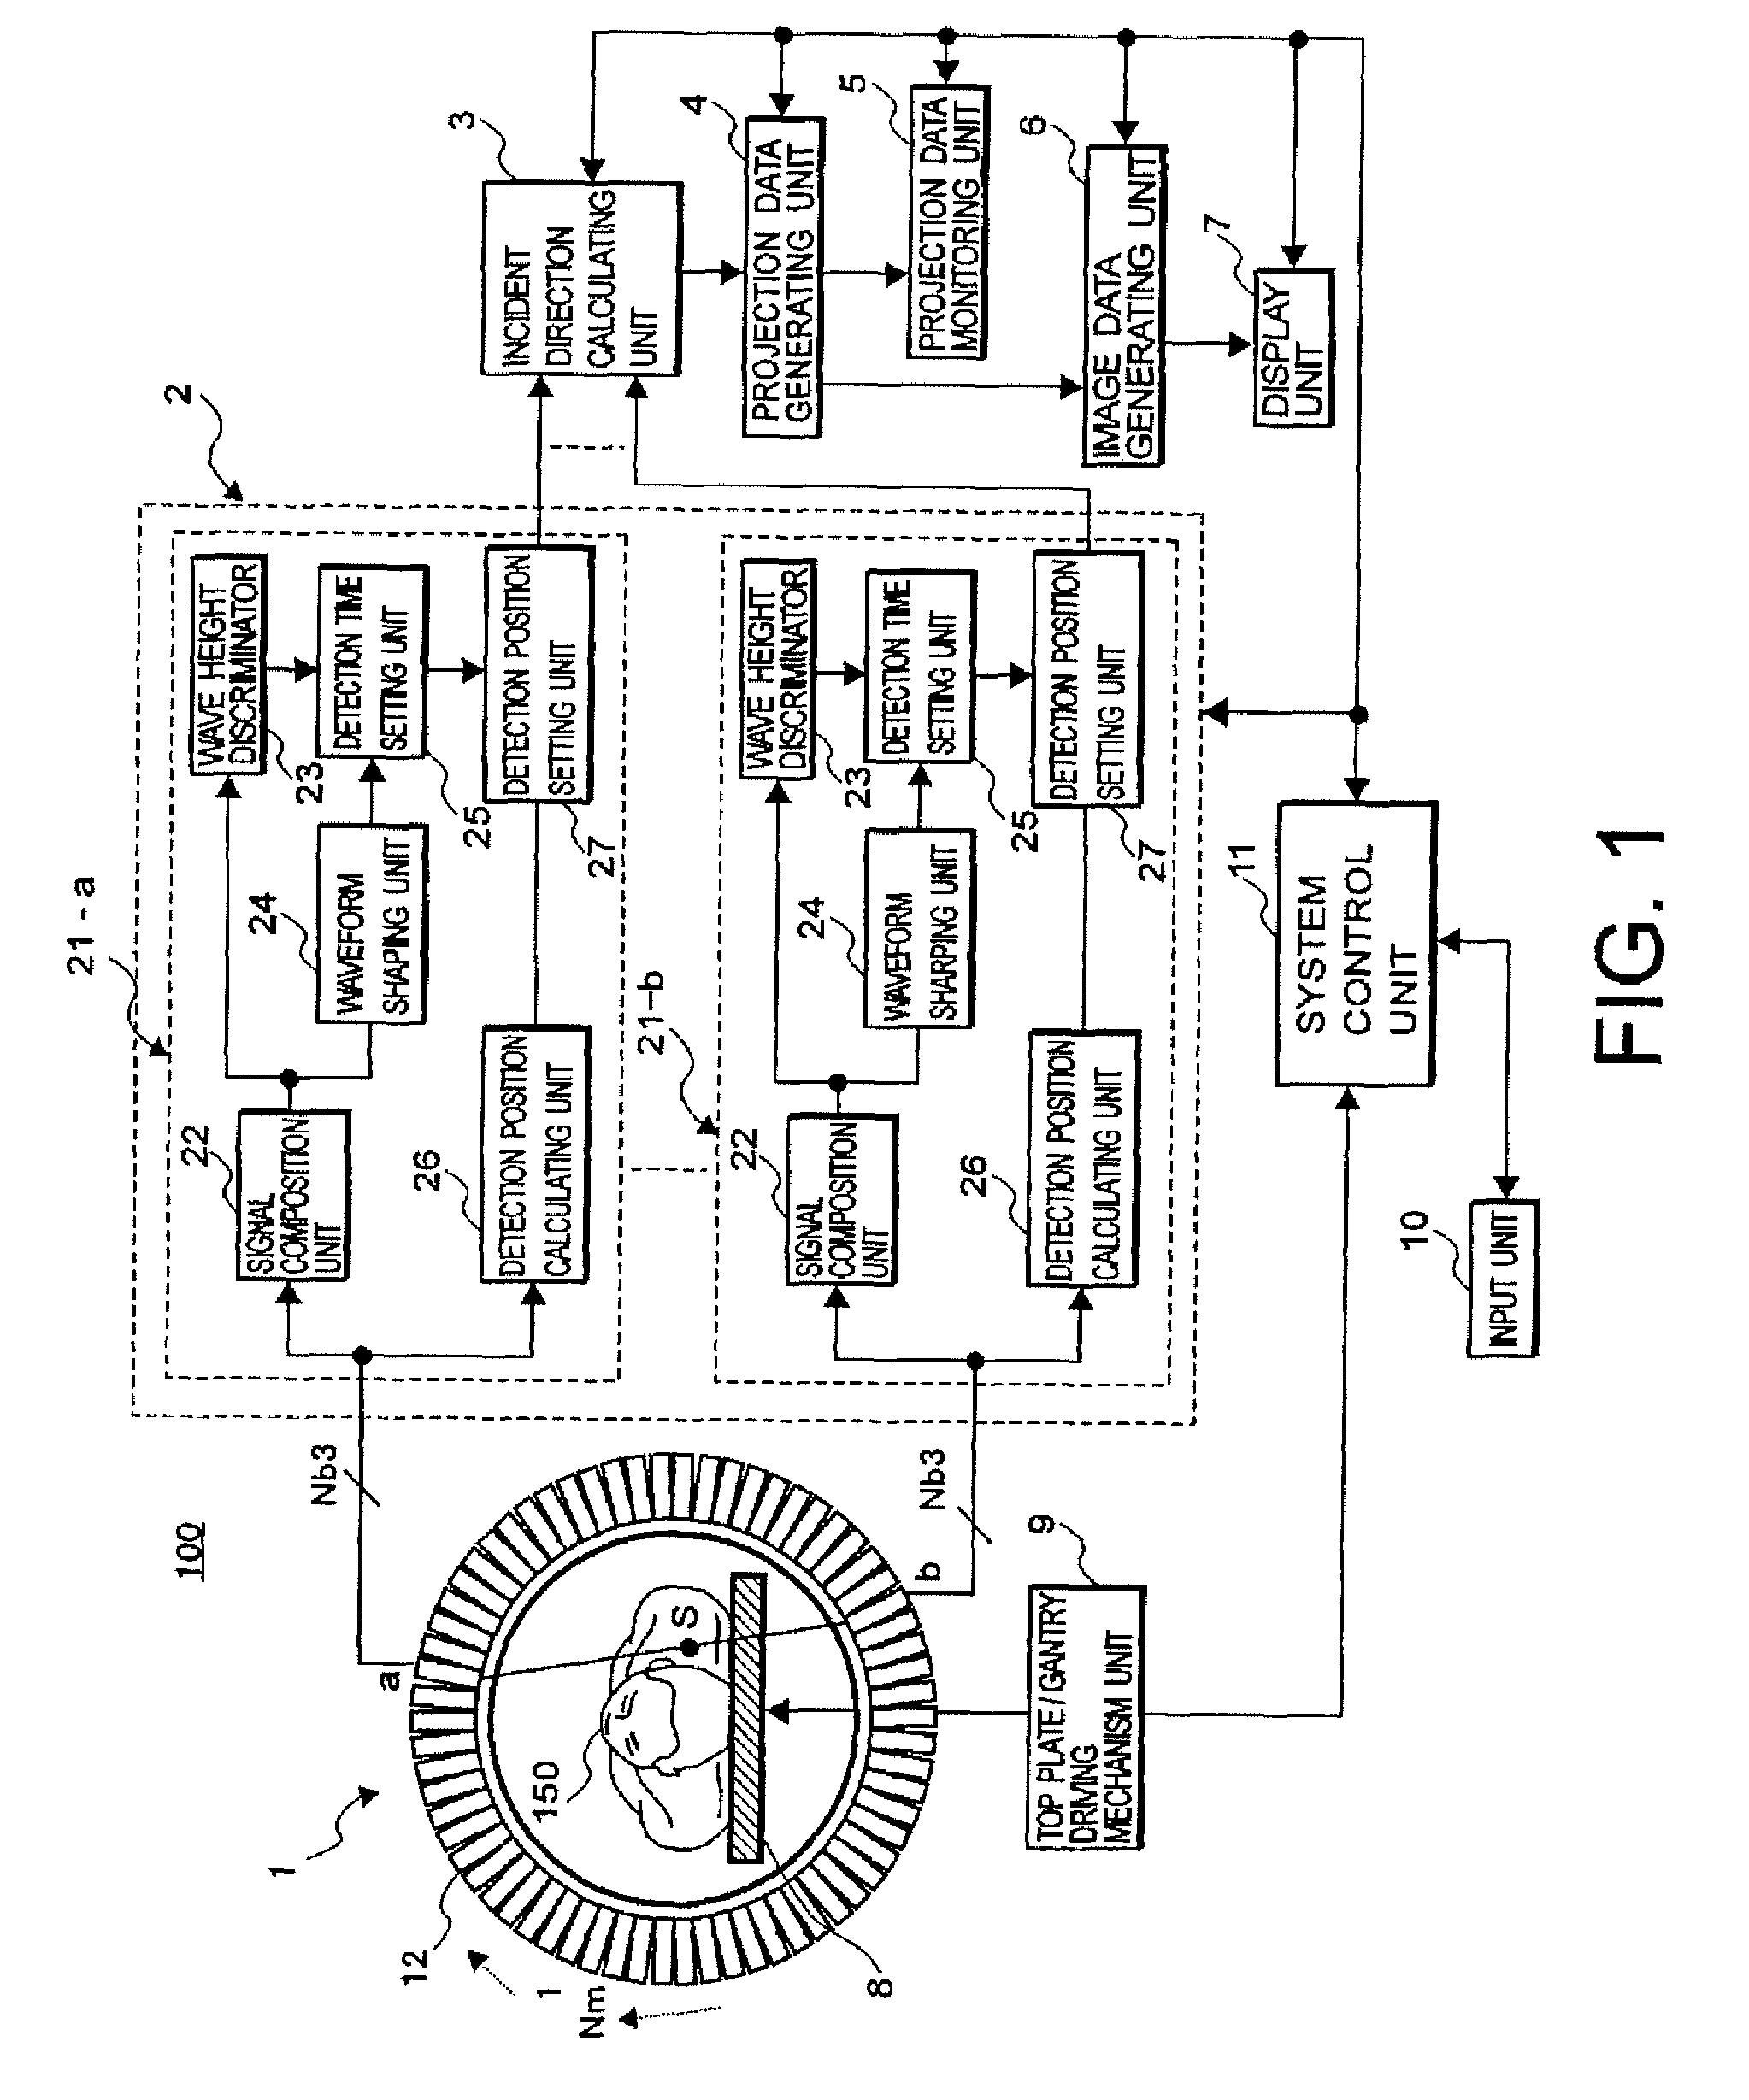 Nuclear medicine imaging apparatus and a method for generating image data